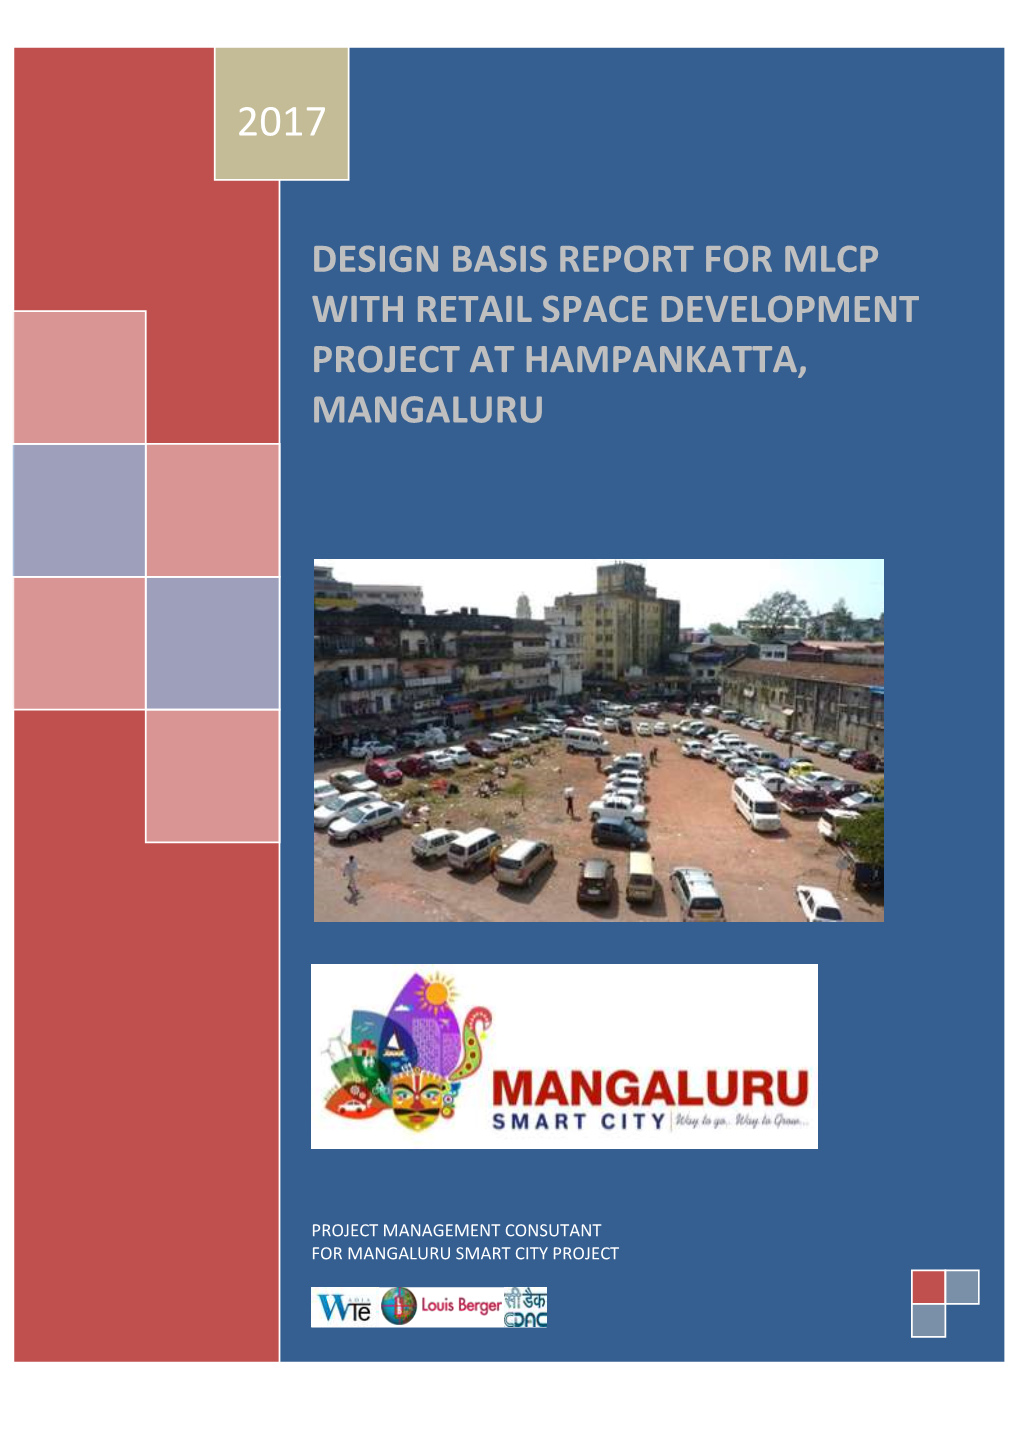 Design Basis Report for Mlcp with Retail Space